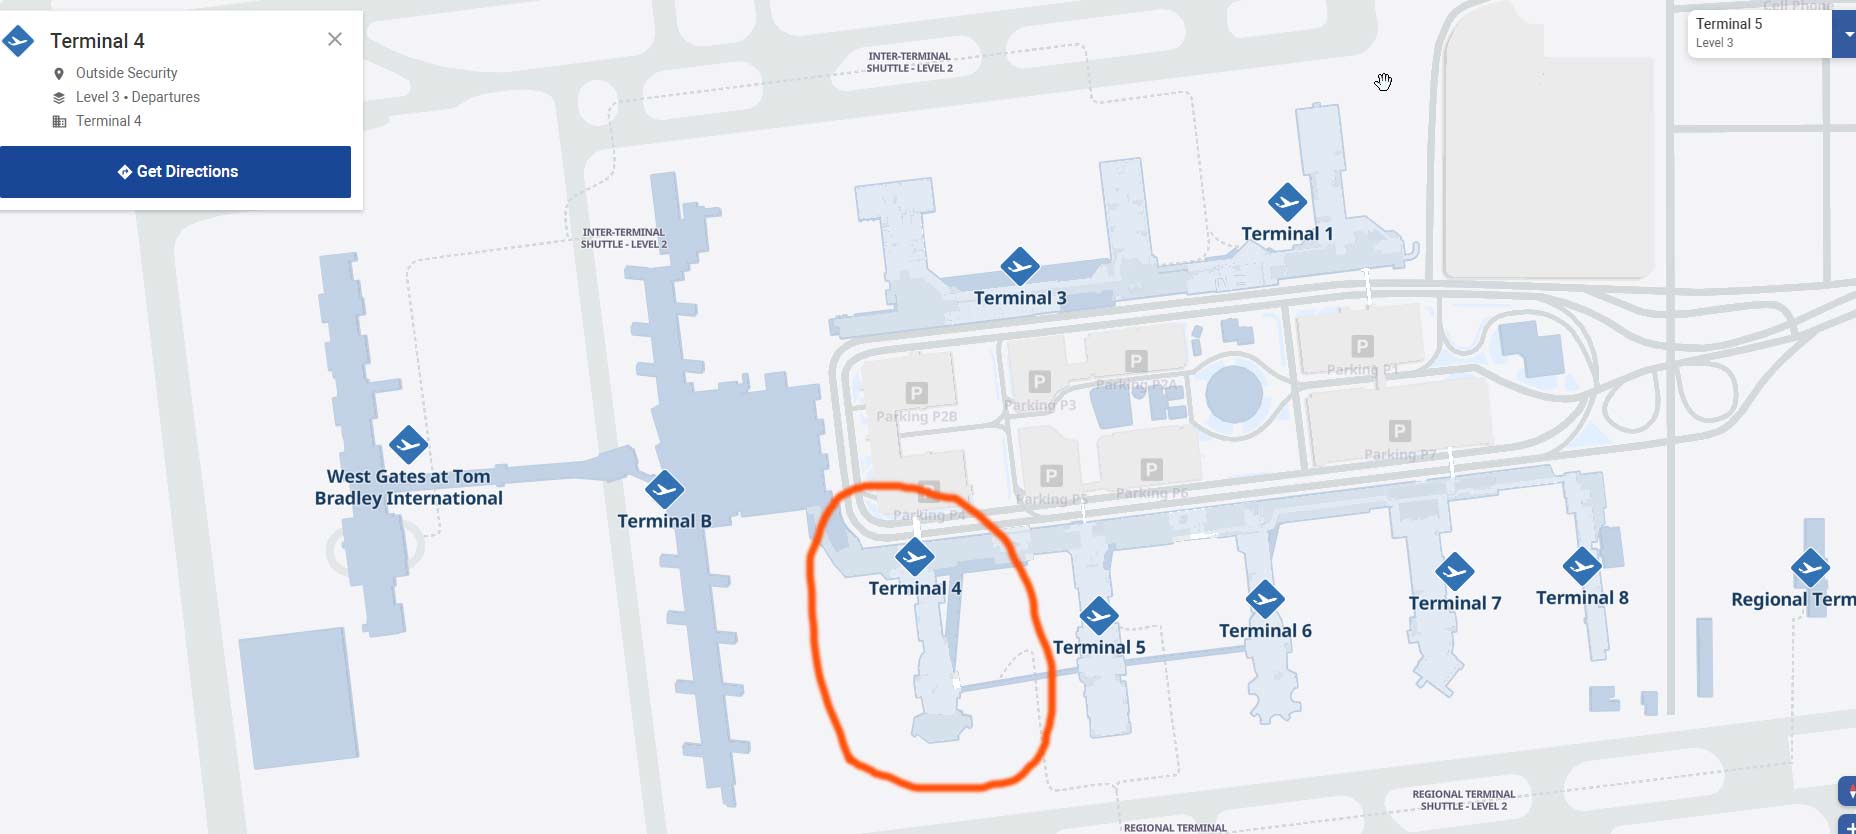 Gates 40 to 49 are the ones that are to be found in Terminal 4.